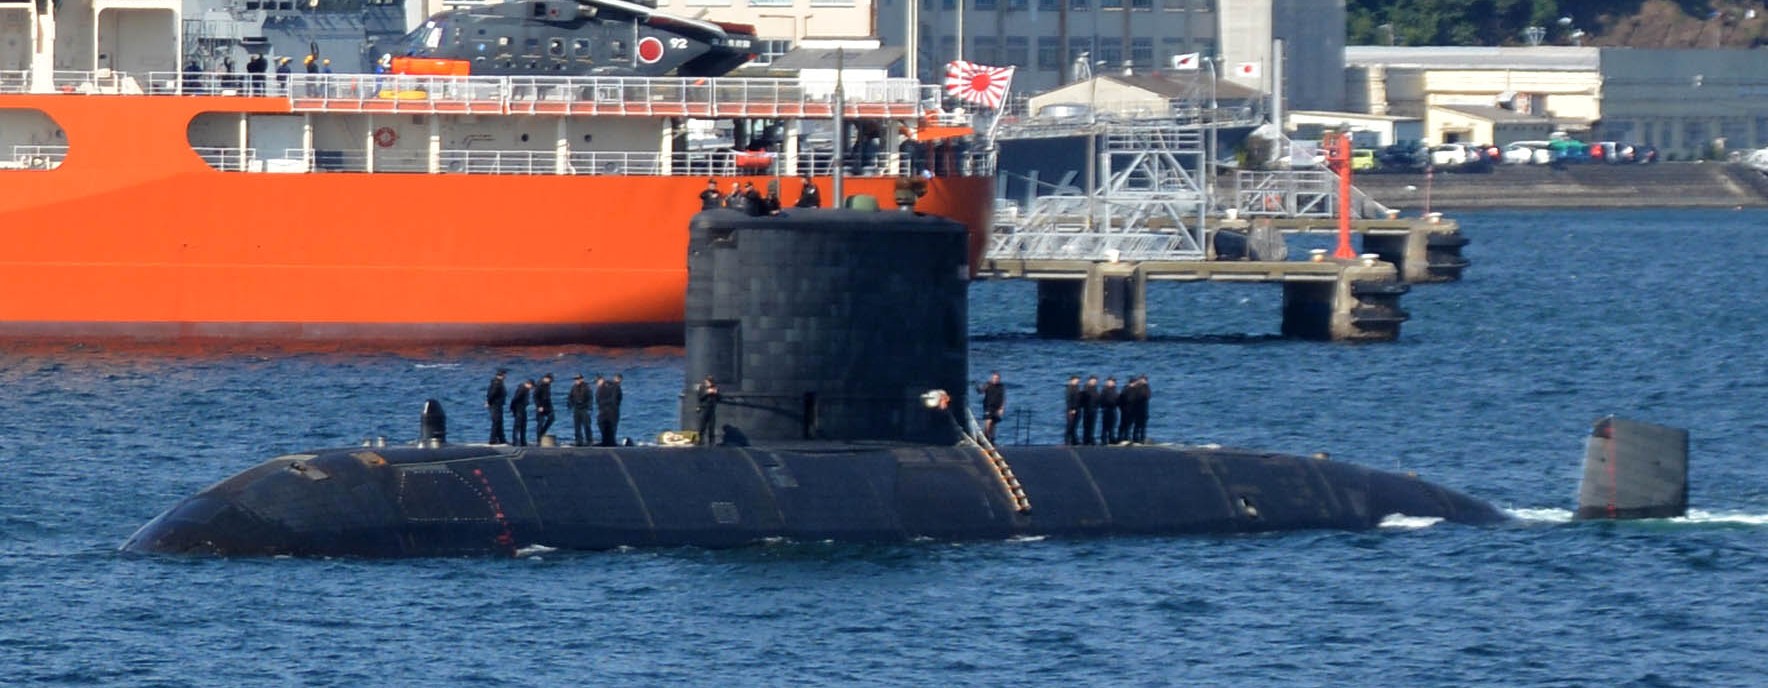 ssk-879 hmcs chicoutimi victoria upholder class patrol submarine ncsm royal canadian navy 05